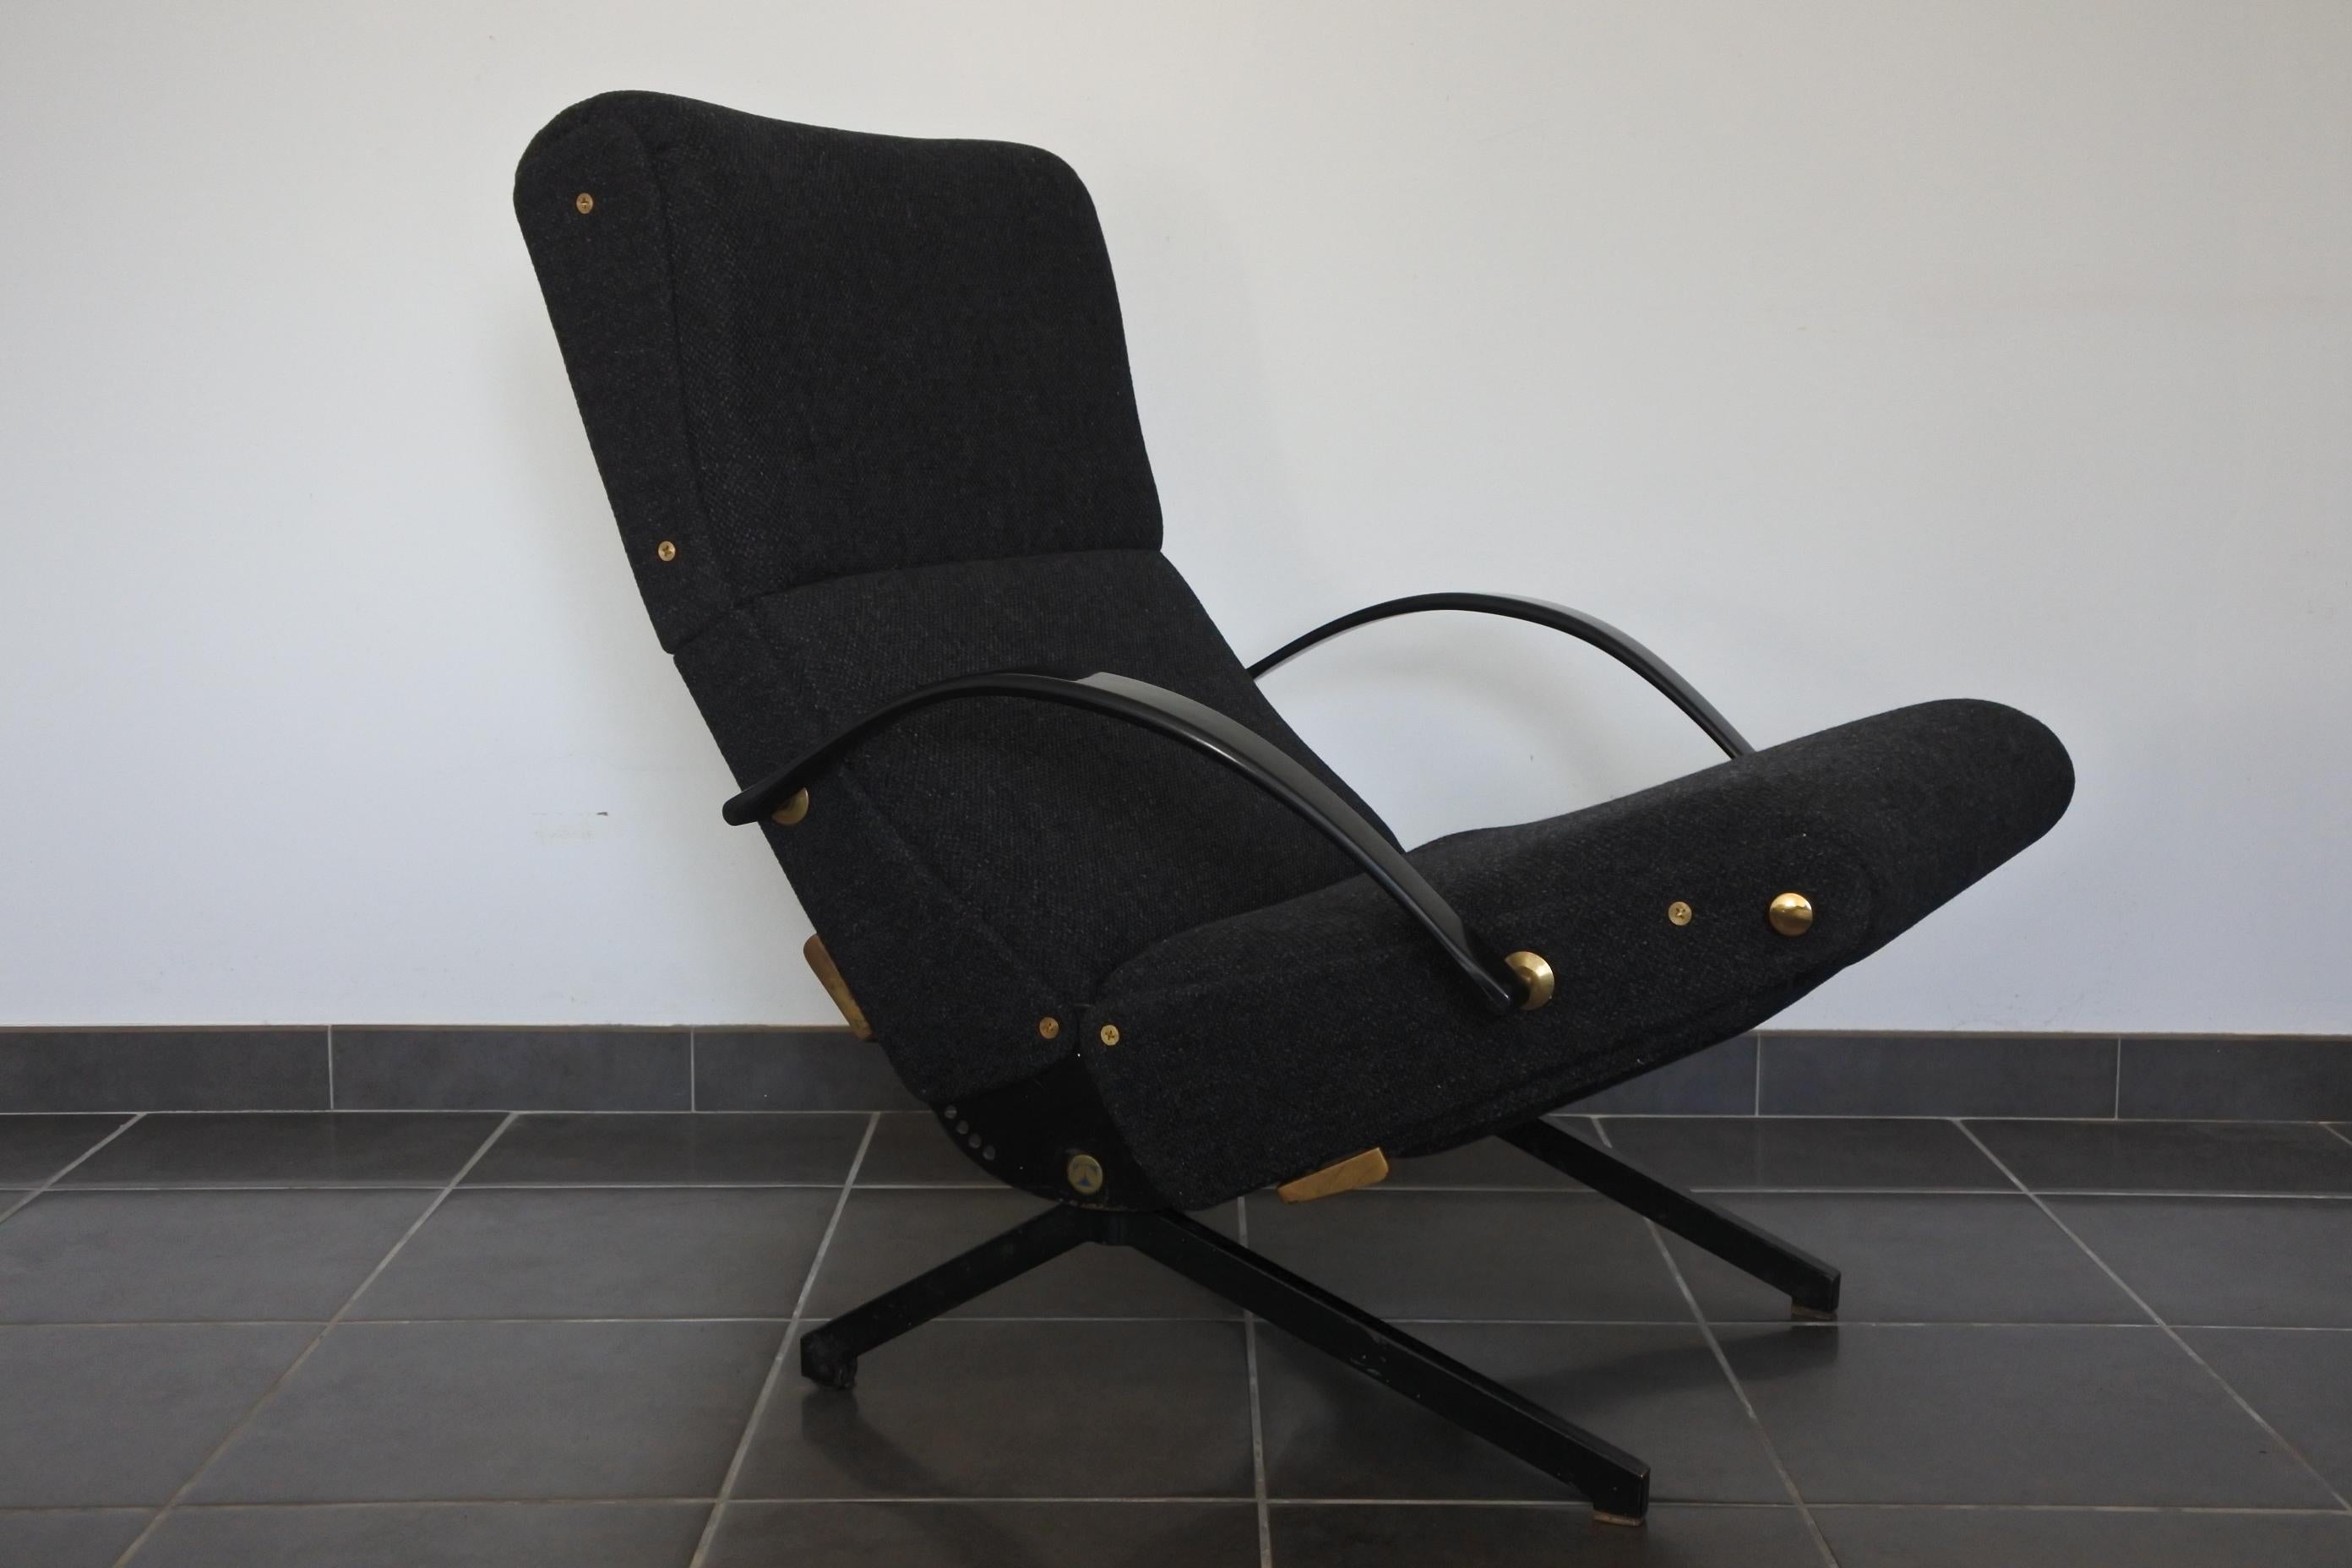 Early lounge chair model P40 by Italian designer Osvaldo Borsani.
Designed in 1956 and edited by Tecno.
The P40 armchair can be adjusted into countless different positions.
The seat, back and footrest can all be adjusted separately from each